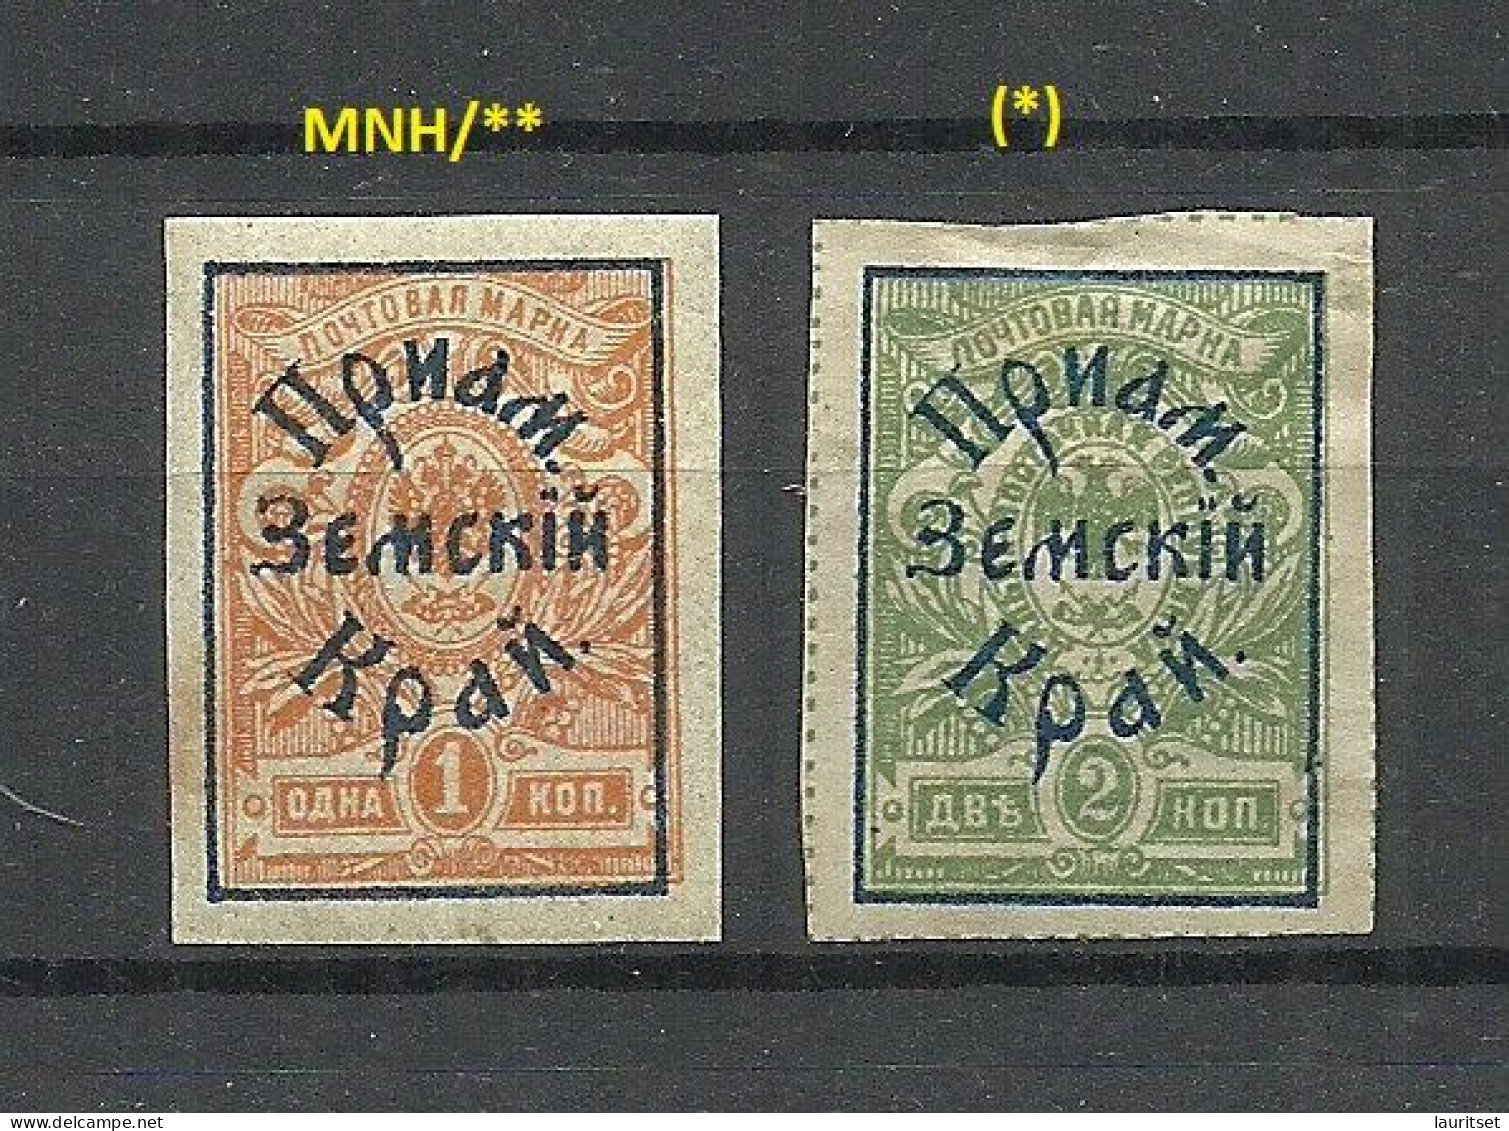 RUSSLAND RUSSIA 1922 Priamur Far East 4 Values From Michel 31 - 32 B MNH/(*) - Siberia And Far East